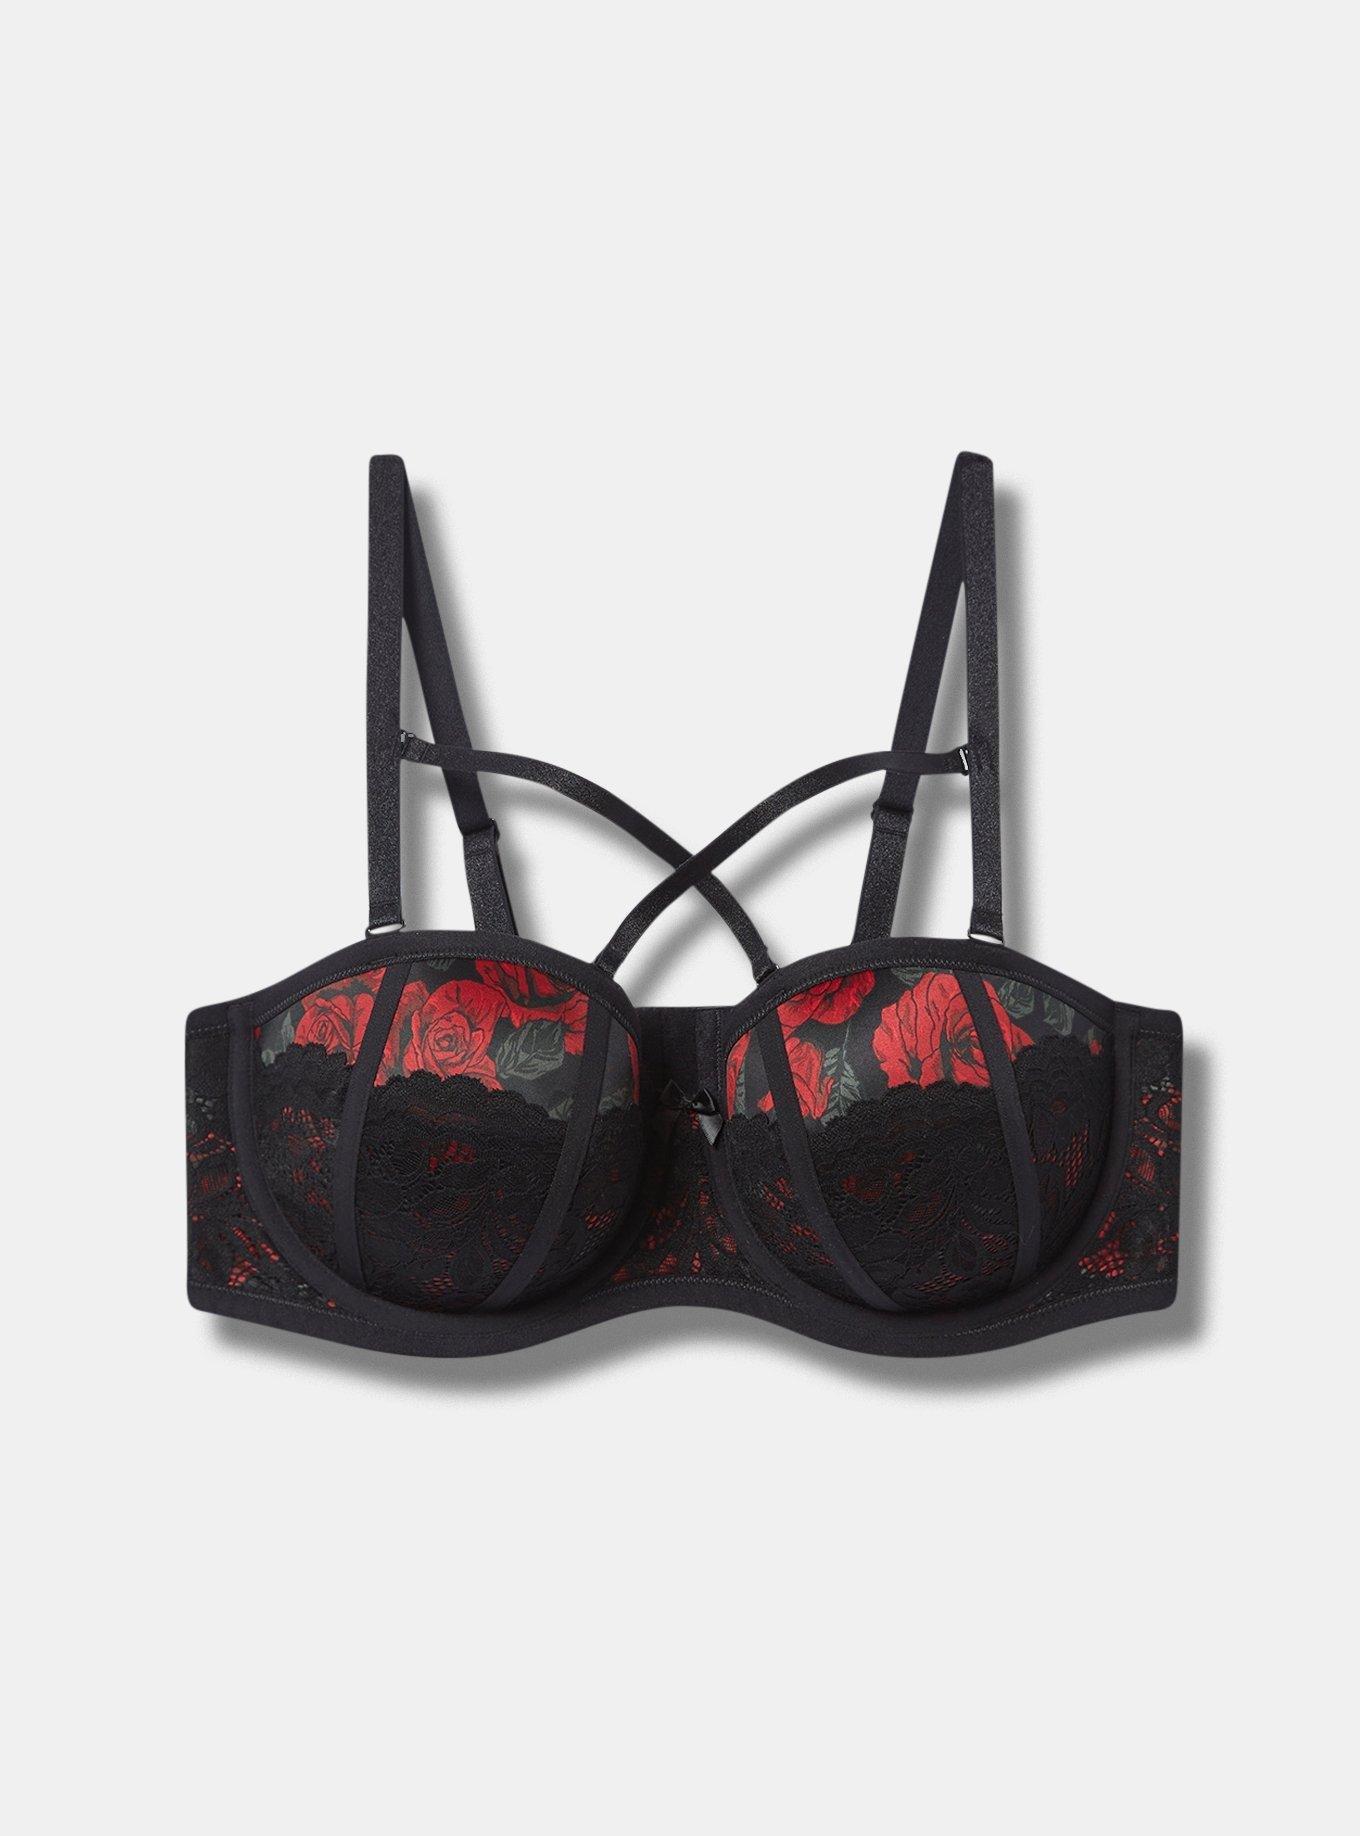 Bralette Lace Red Cacique Collection, Intimates & Sleepwear